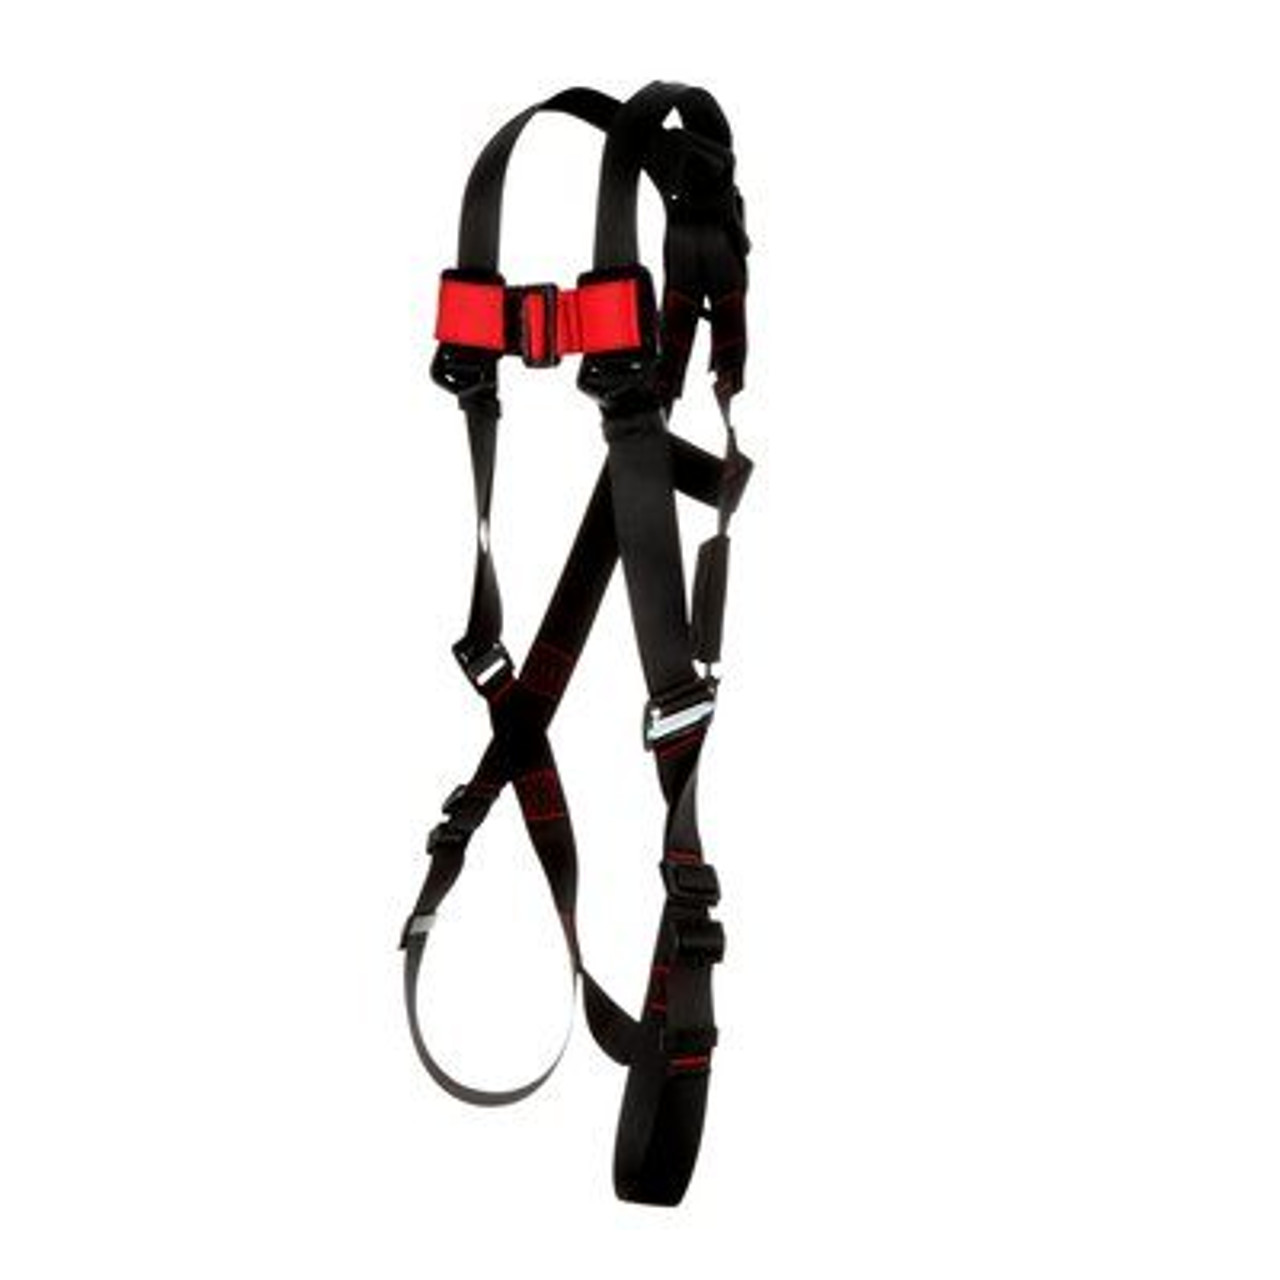 Protecta Vest-Style Harness Black Industrial Safety Products